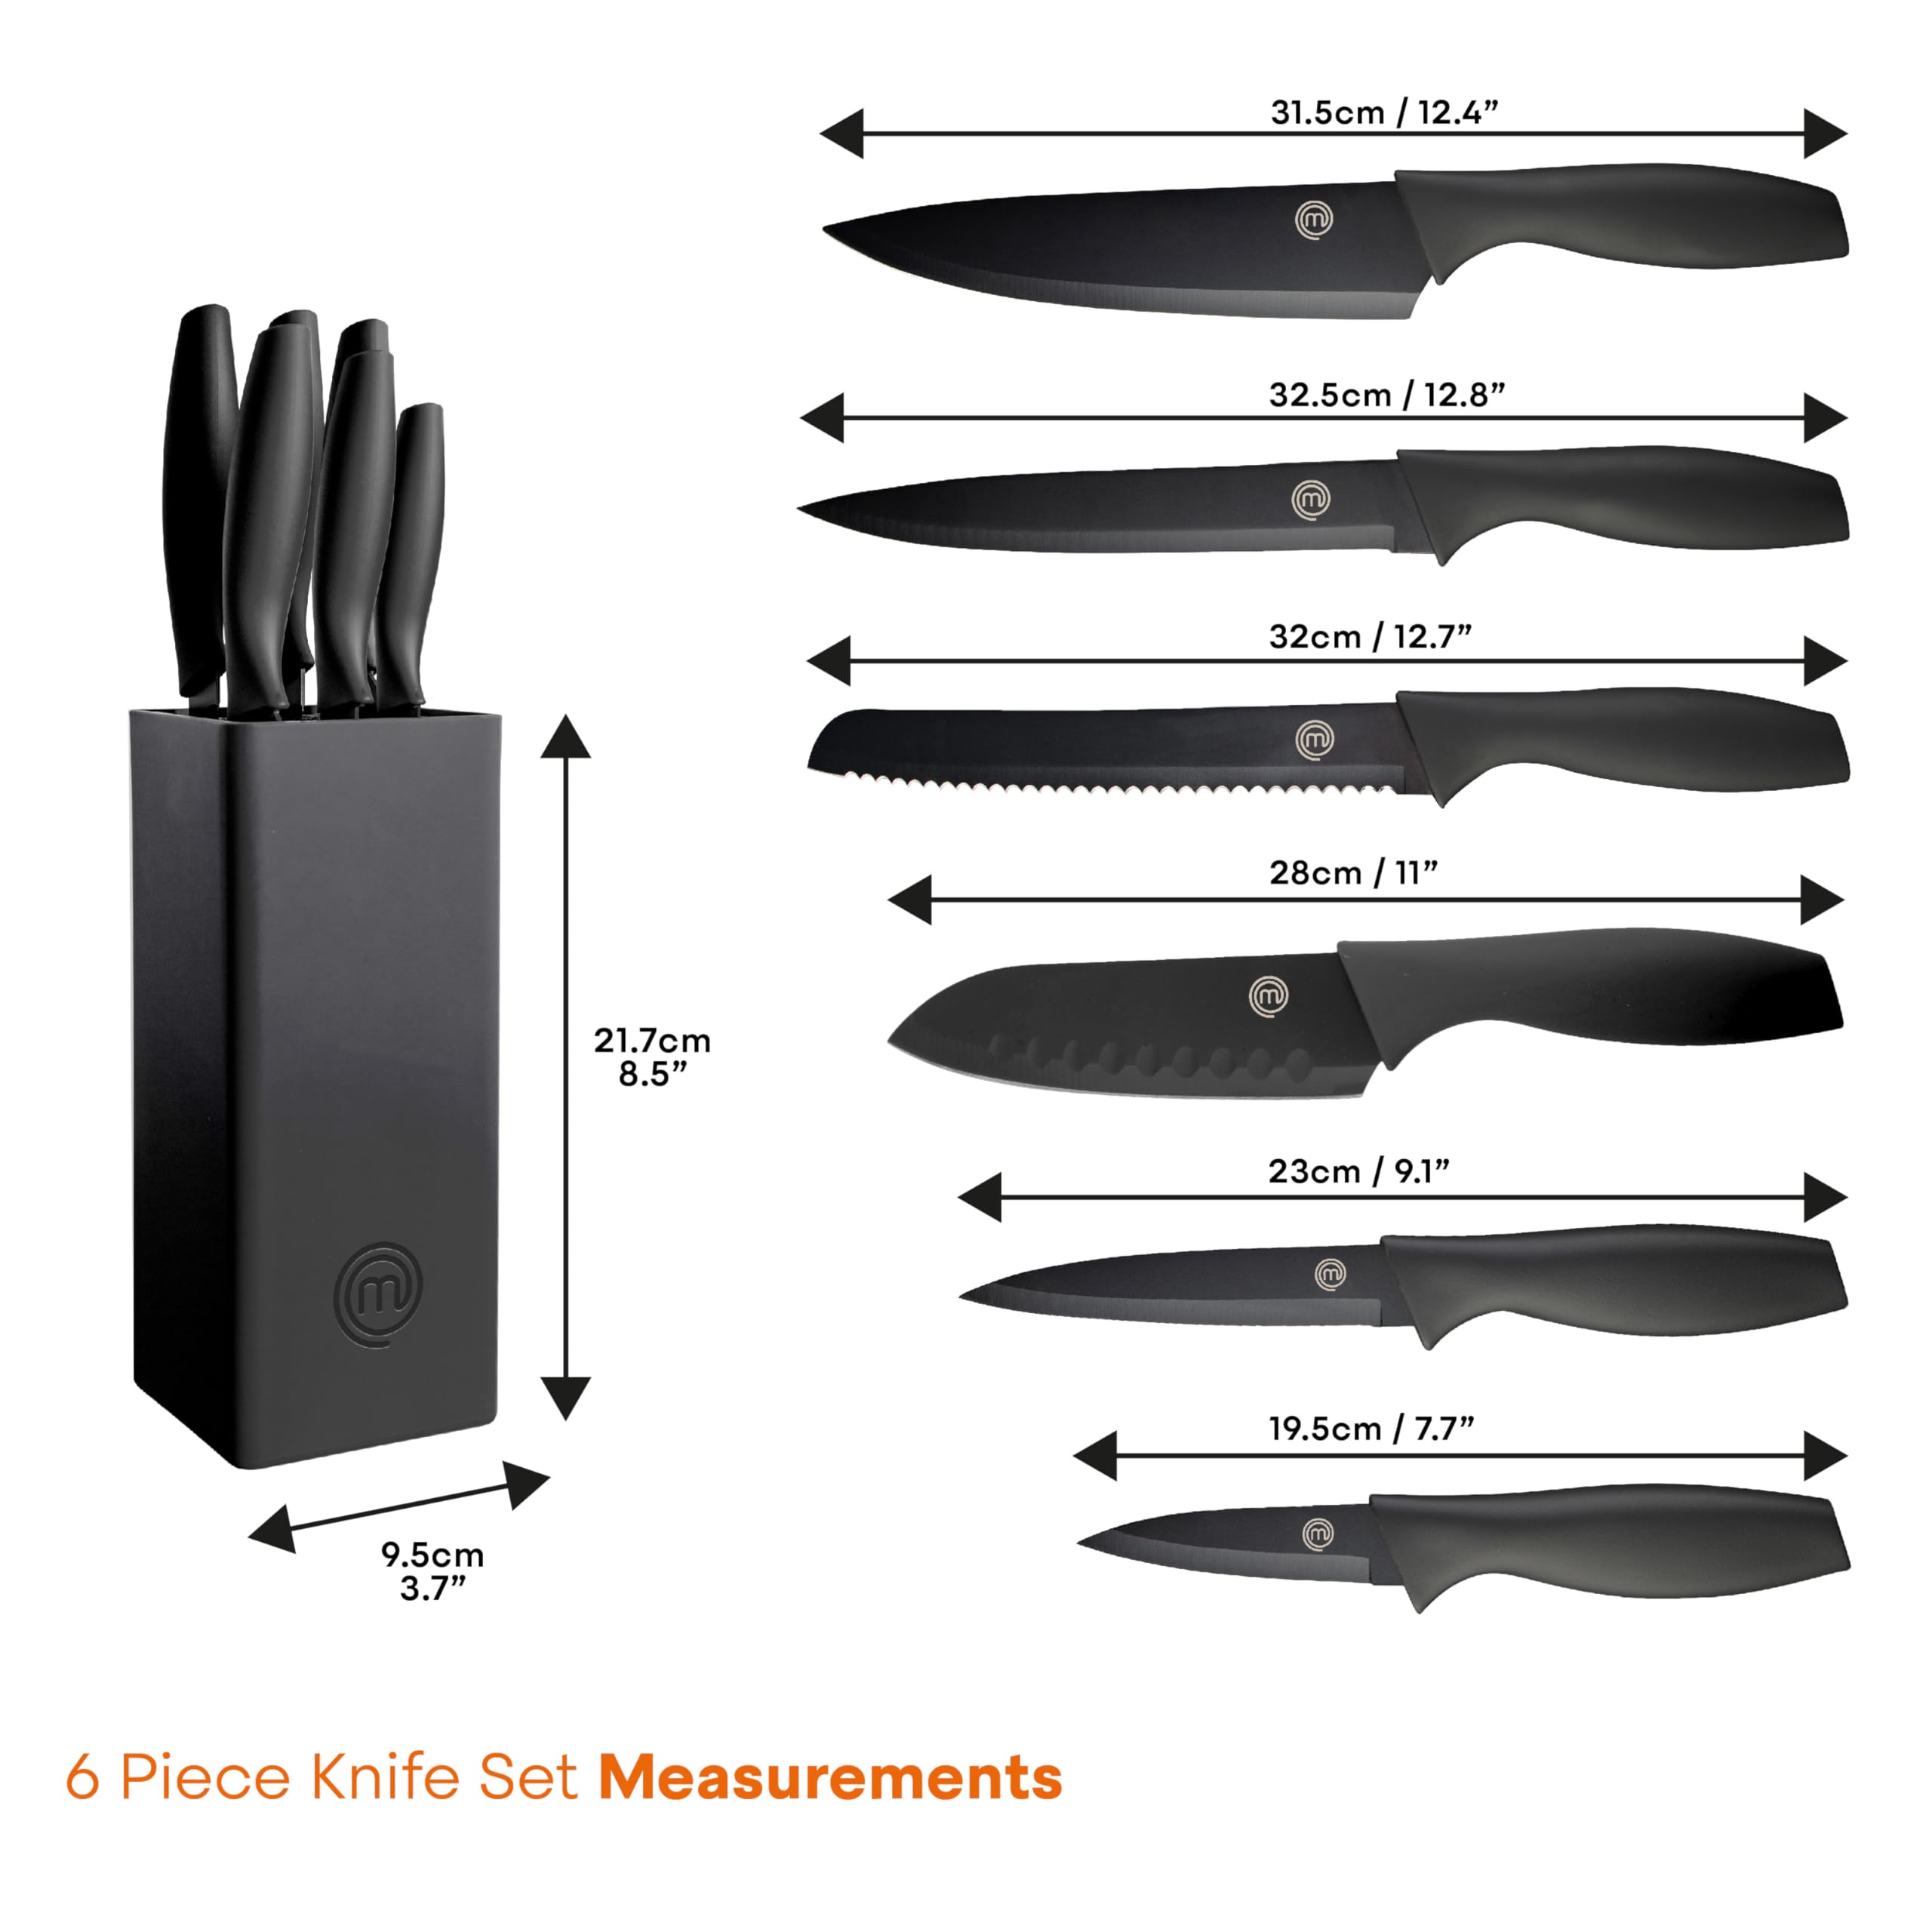 MasterChef Knife Block Set of 6 Kitchen Knives, Extra Sharp Stainless Steel Blades for Professional Cutting with Non Stick Coating & Soft Touch Easy Grip Handles in a Universal Block, Essential Black